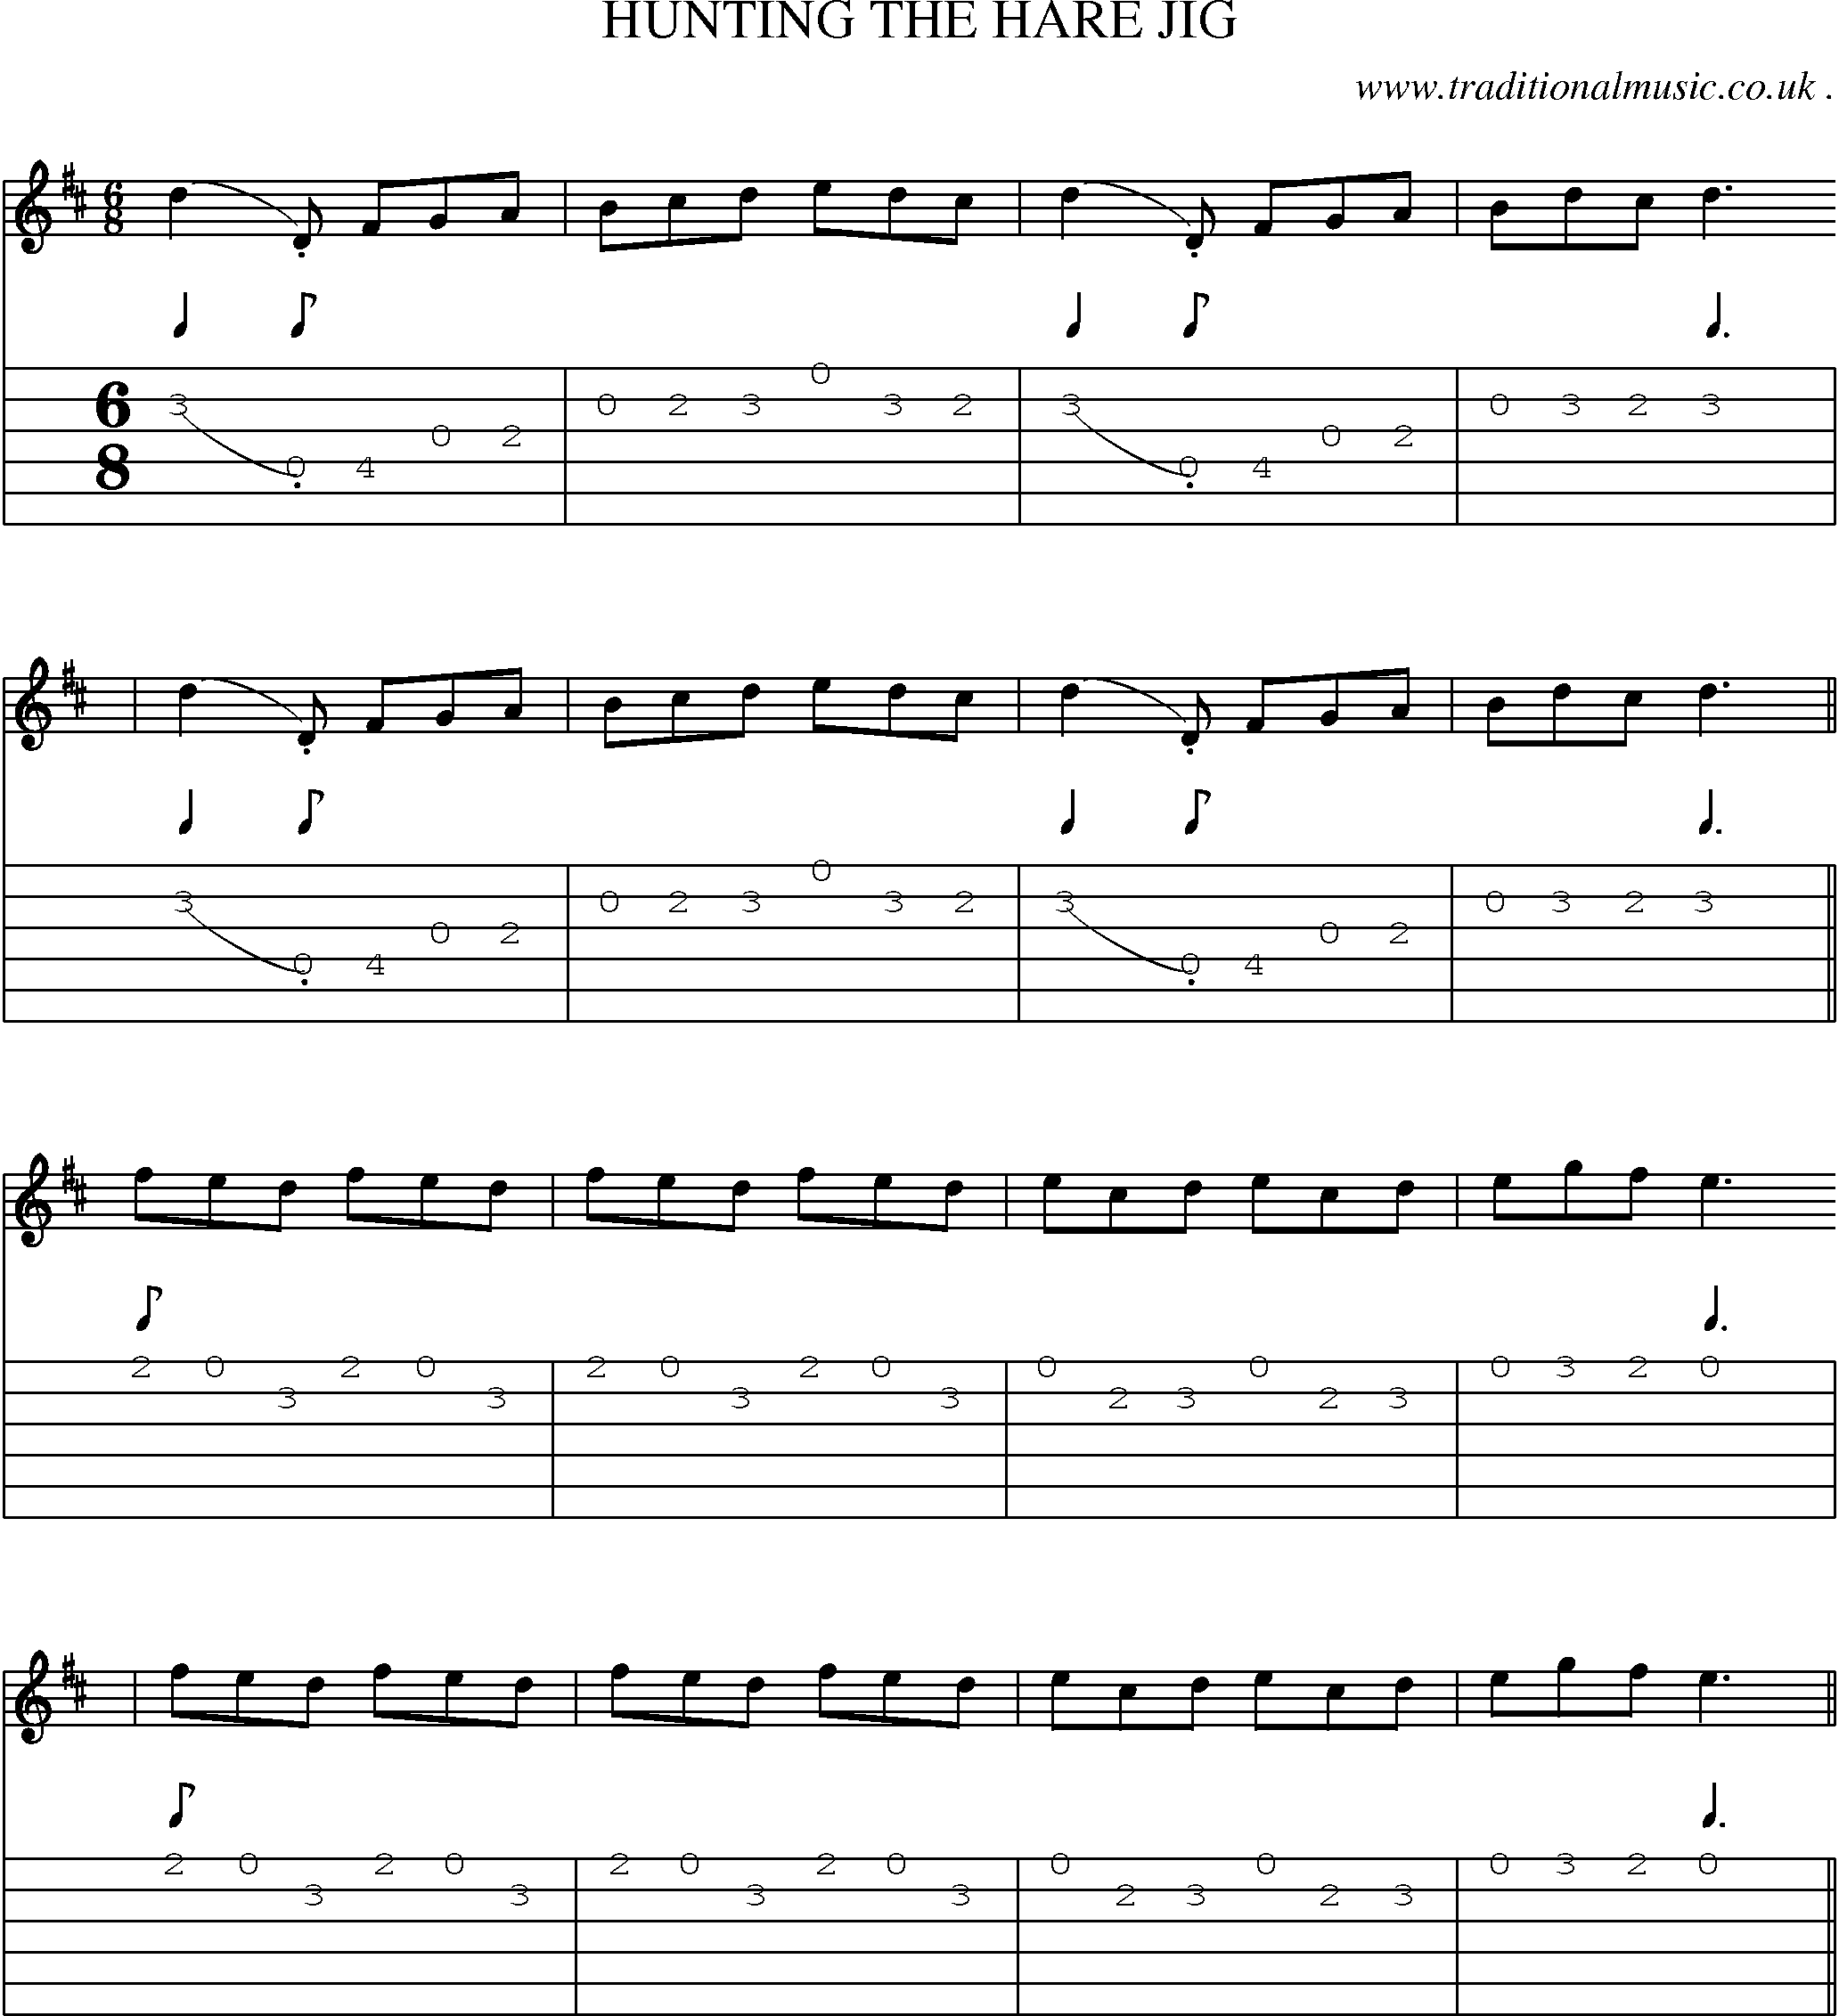 Sheet-Music and Guitar Tabs for Hunting The Hare Jig